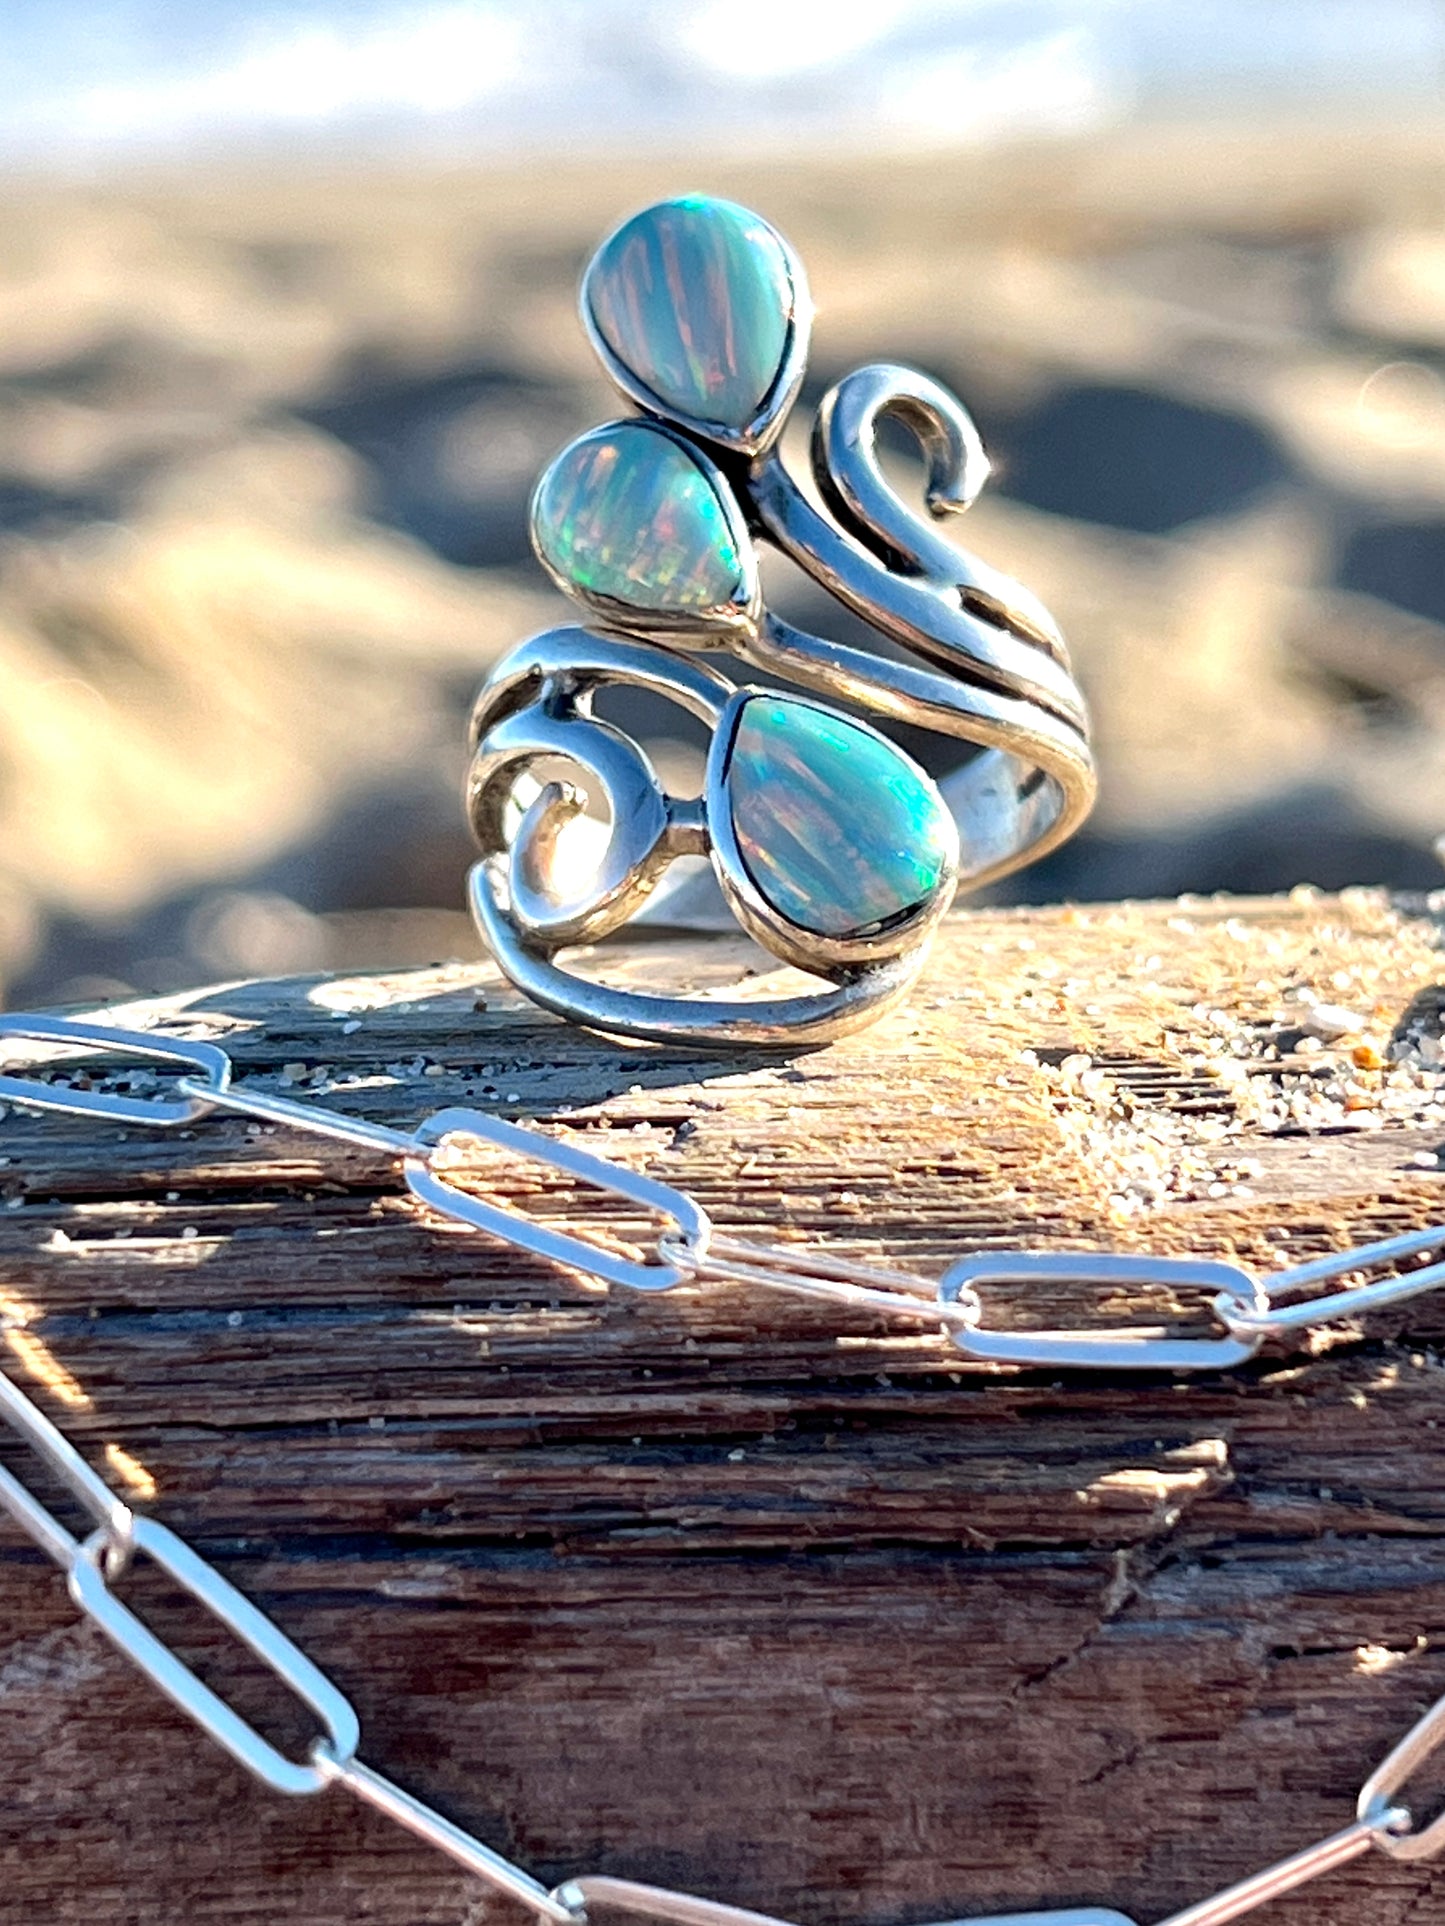 Super Silver's Stunning Wrap-Around Opal Ring.